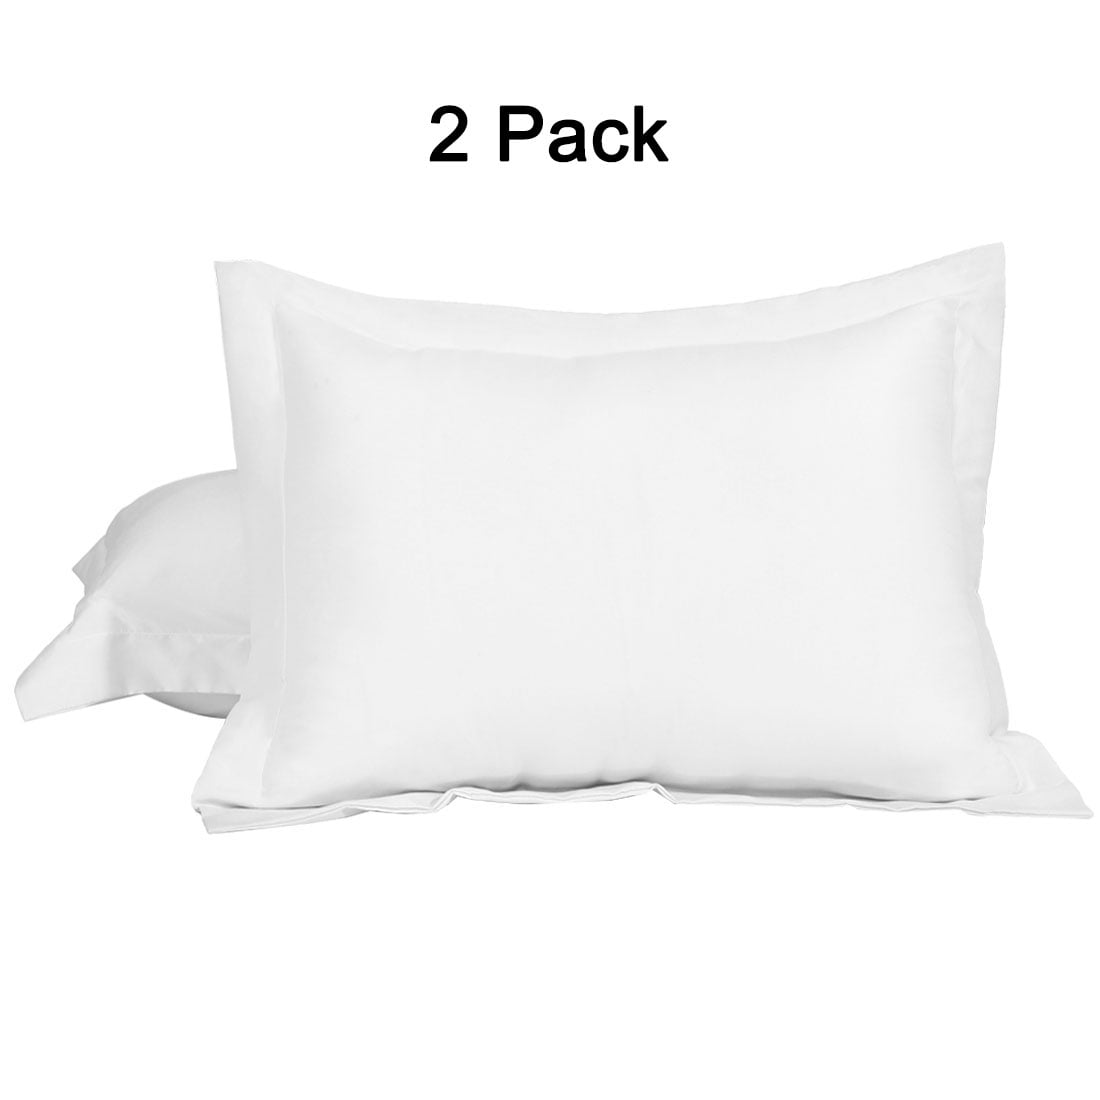 Details about   Set of 2 Pillow Shams 1800 Series Standard Queen King Ultra Soft and Breathable 